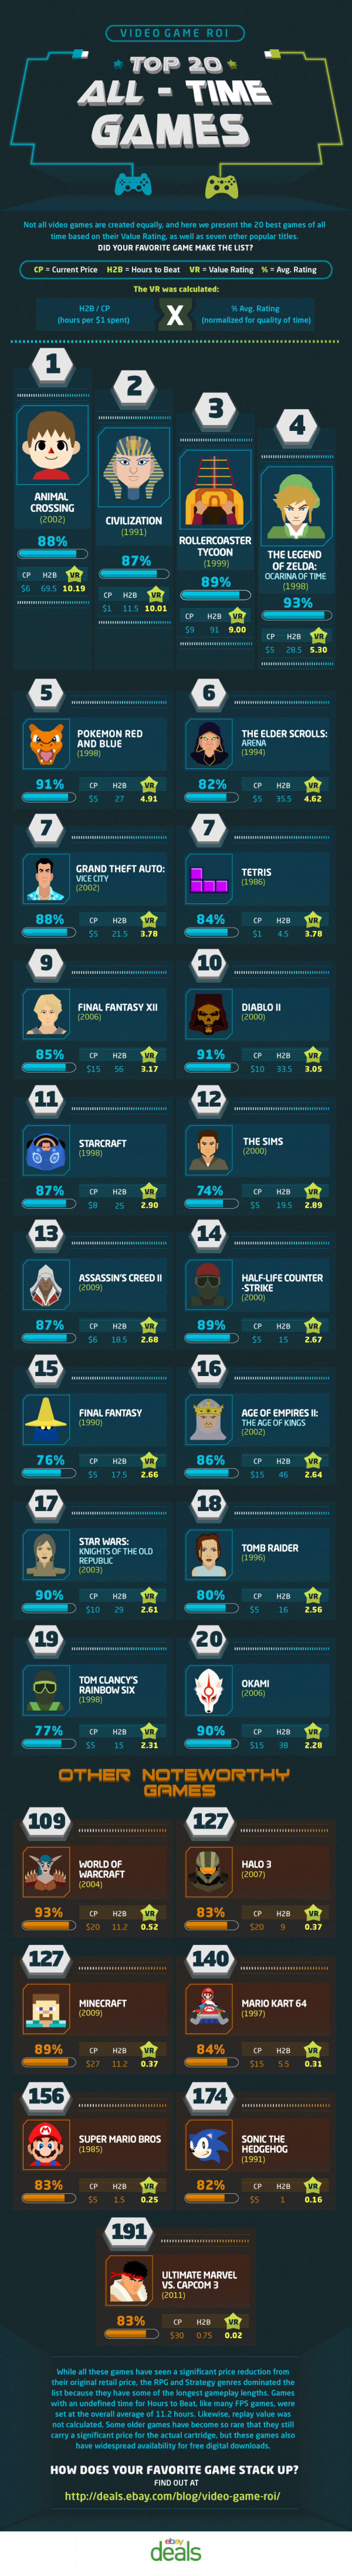 Top 20 Games of All Time Infographic